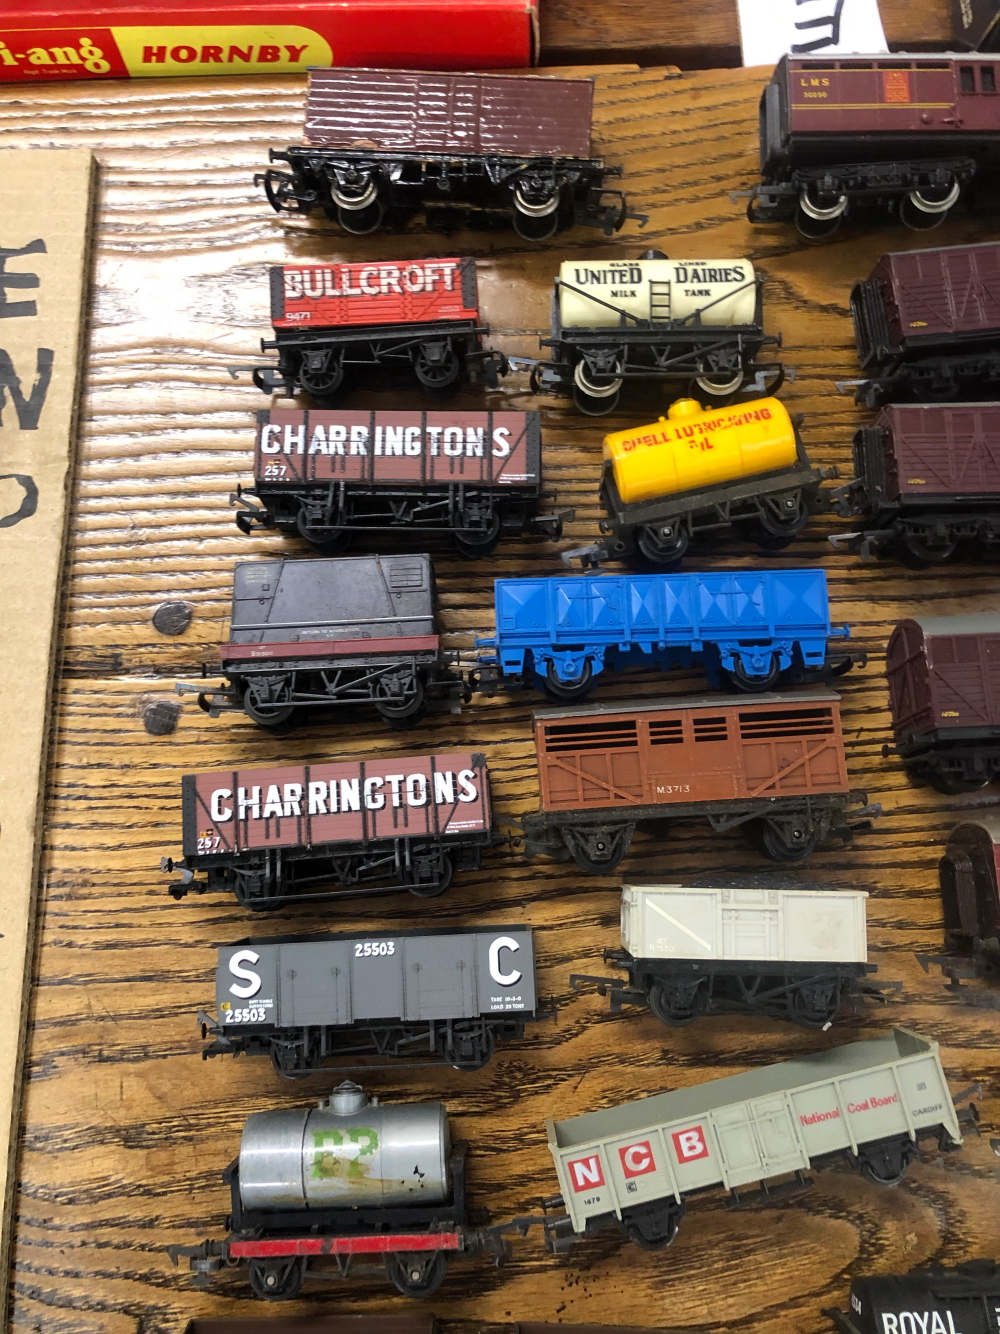 A LARGE COLLECTION OF RAILWAY ROLLING STOCK AND A ROYAL MAIL CARRIAGE - Image 2 of 5